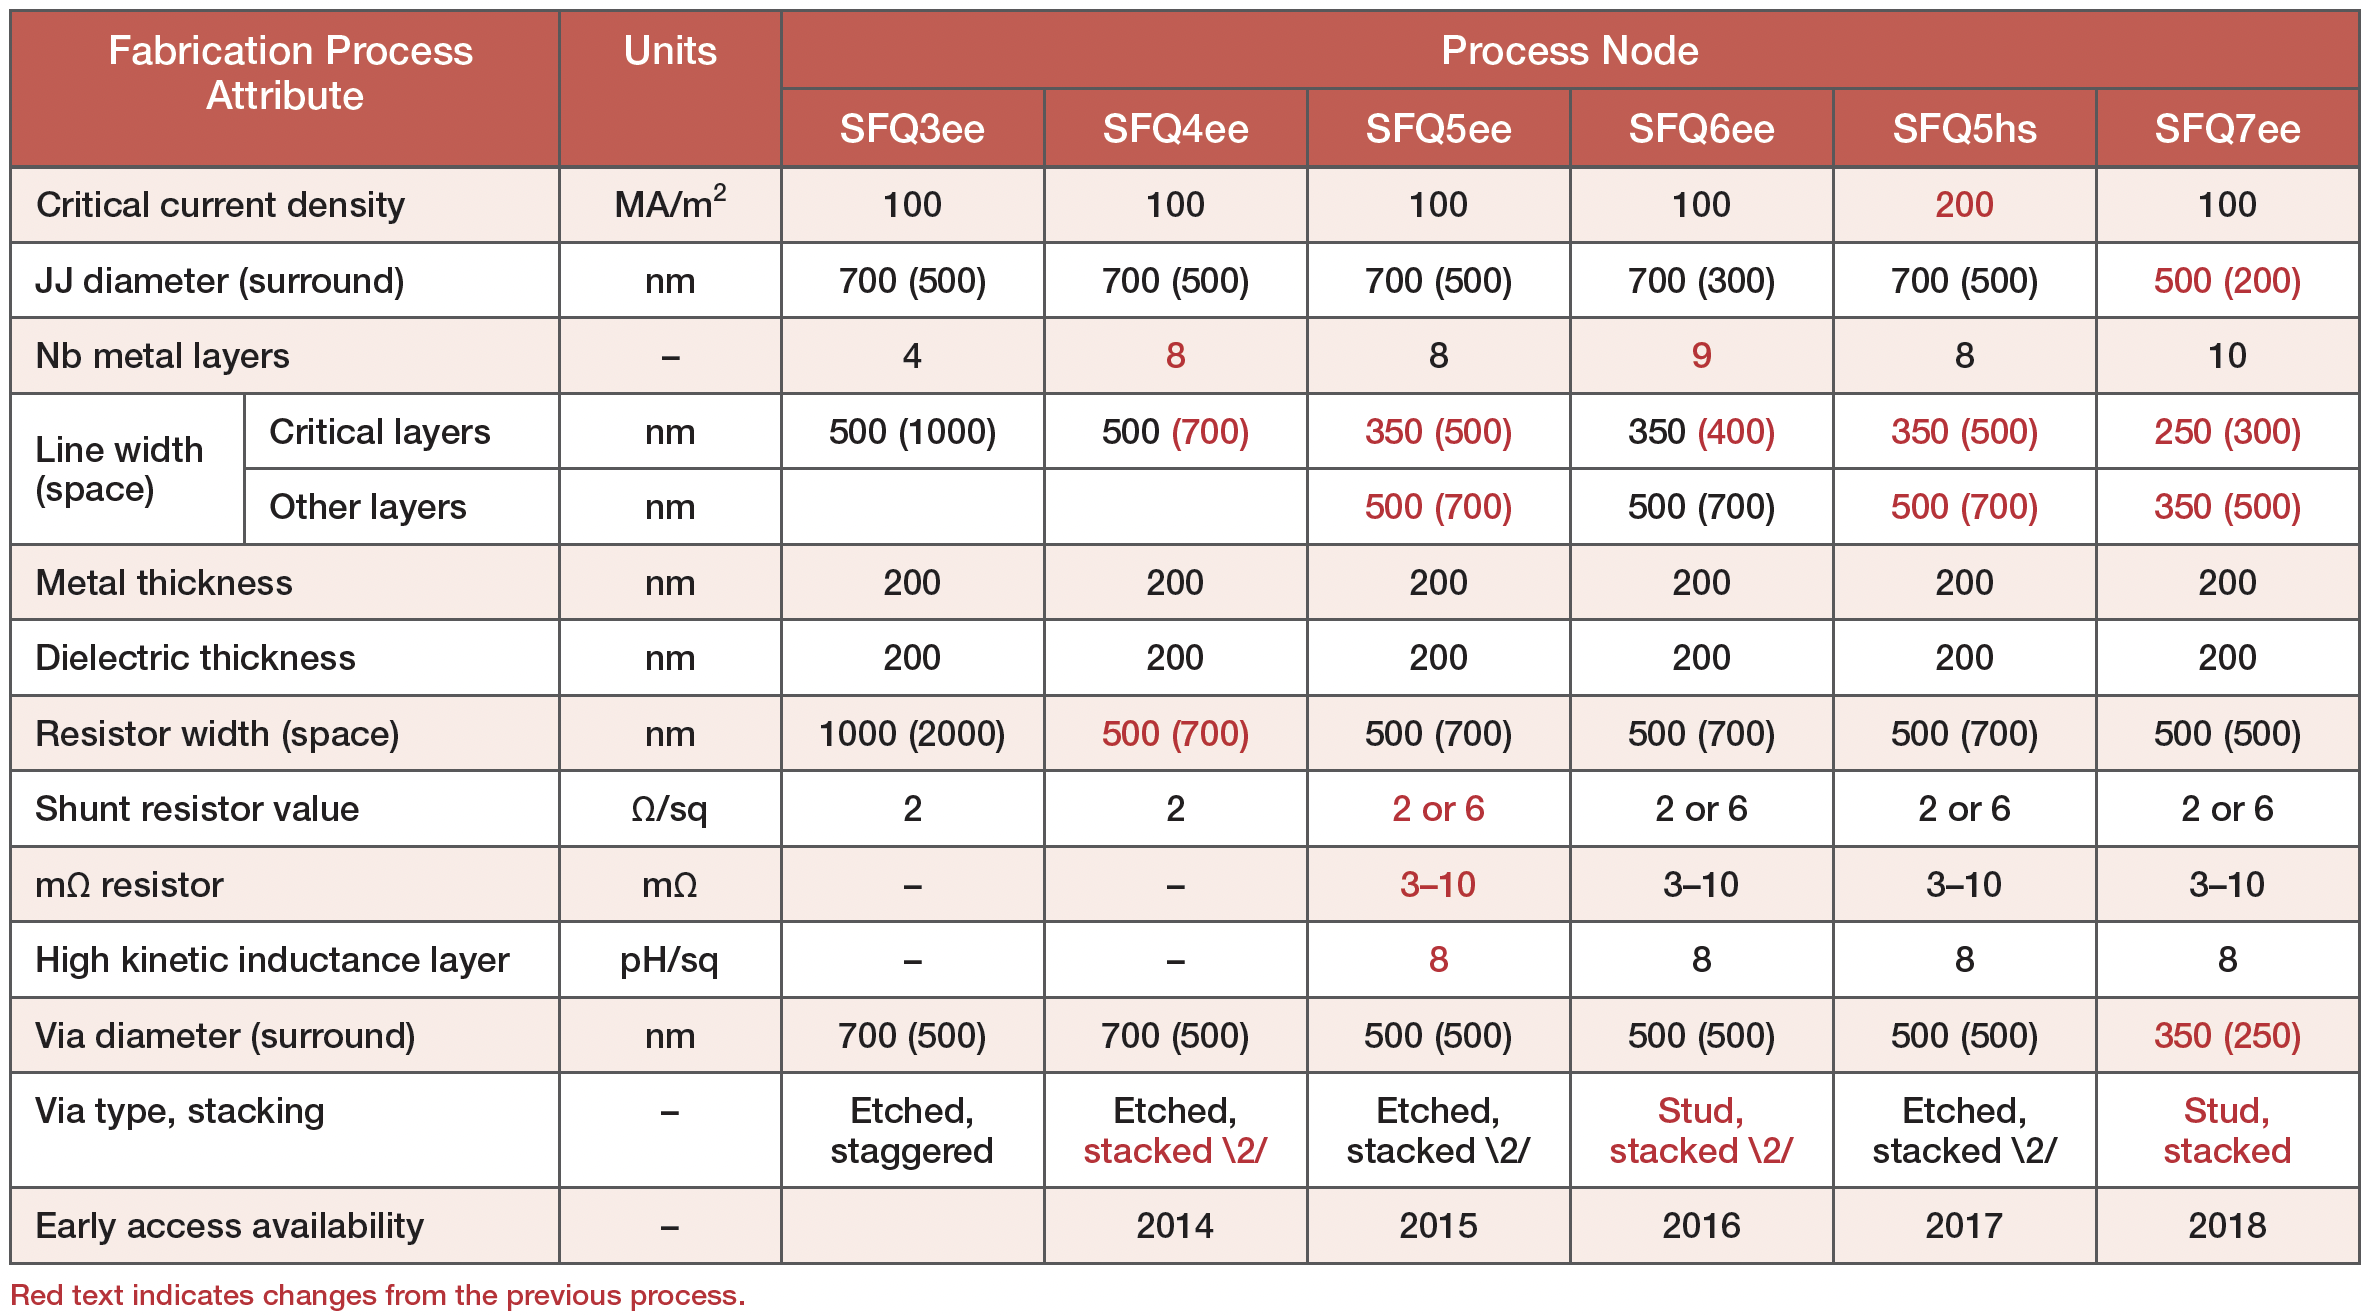 A table showing various SFQ process nodes available or under development. 